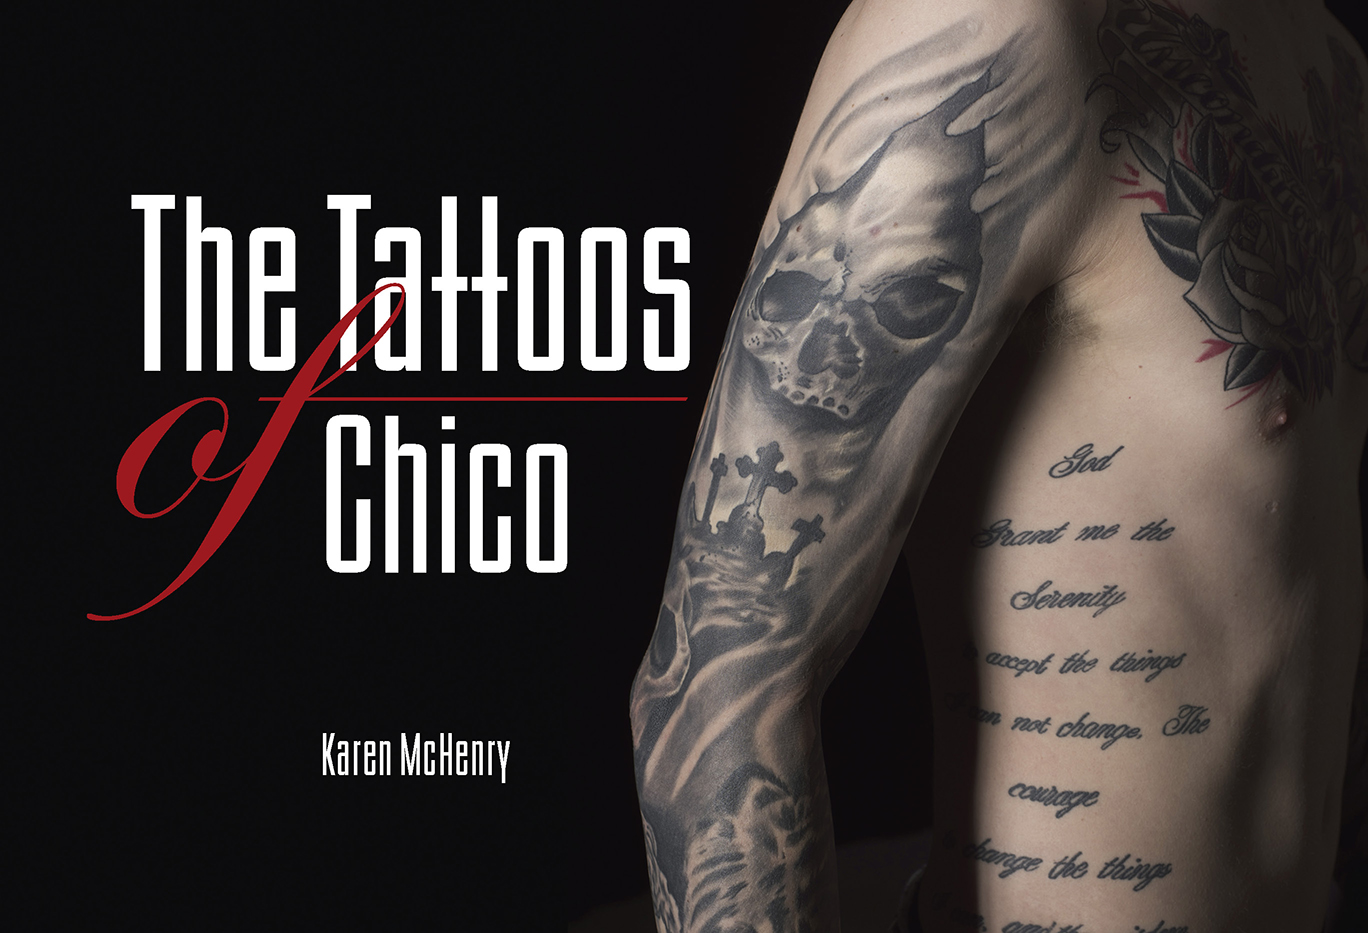 Click to order The Tattoos of Chico by Karen McHenry